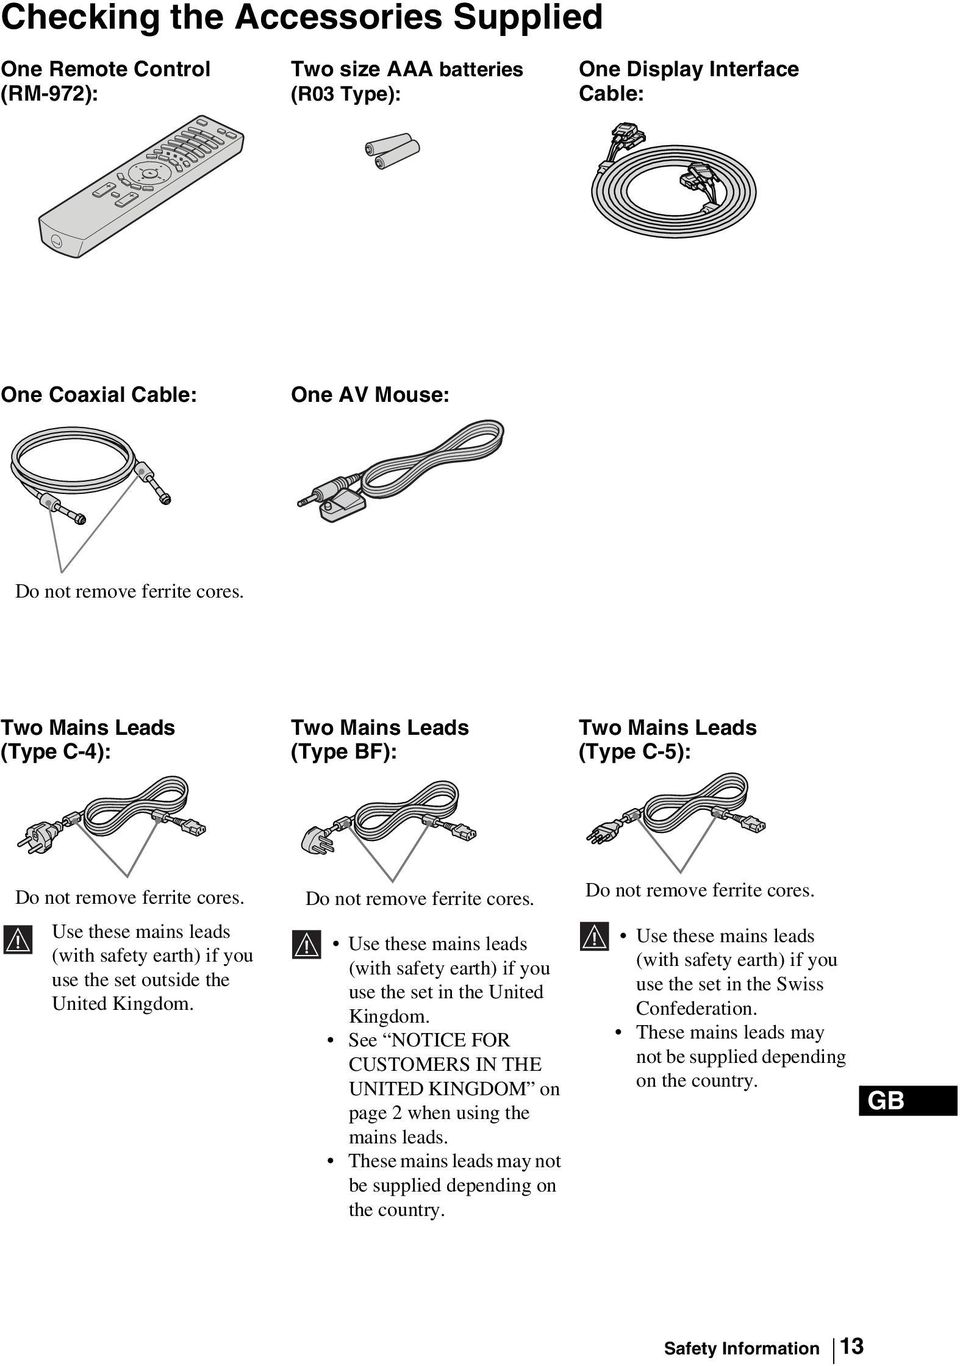 Do not remove ferrite cores. Use these mains leads (with safety earth) if you use the set in the United Kingdom. See NOTICE FOR CUSTOMERS IN THE UNITED KINGDOM on page 2 when using the mains leads.